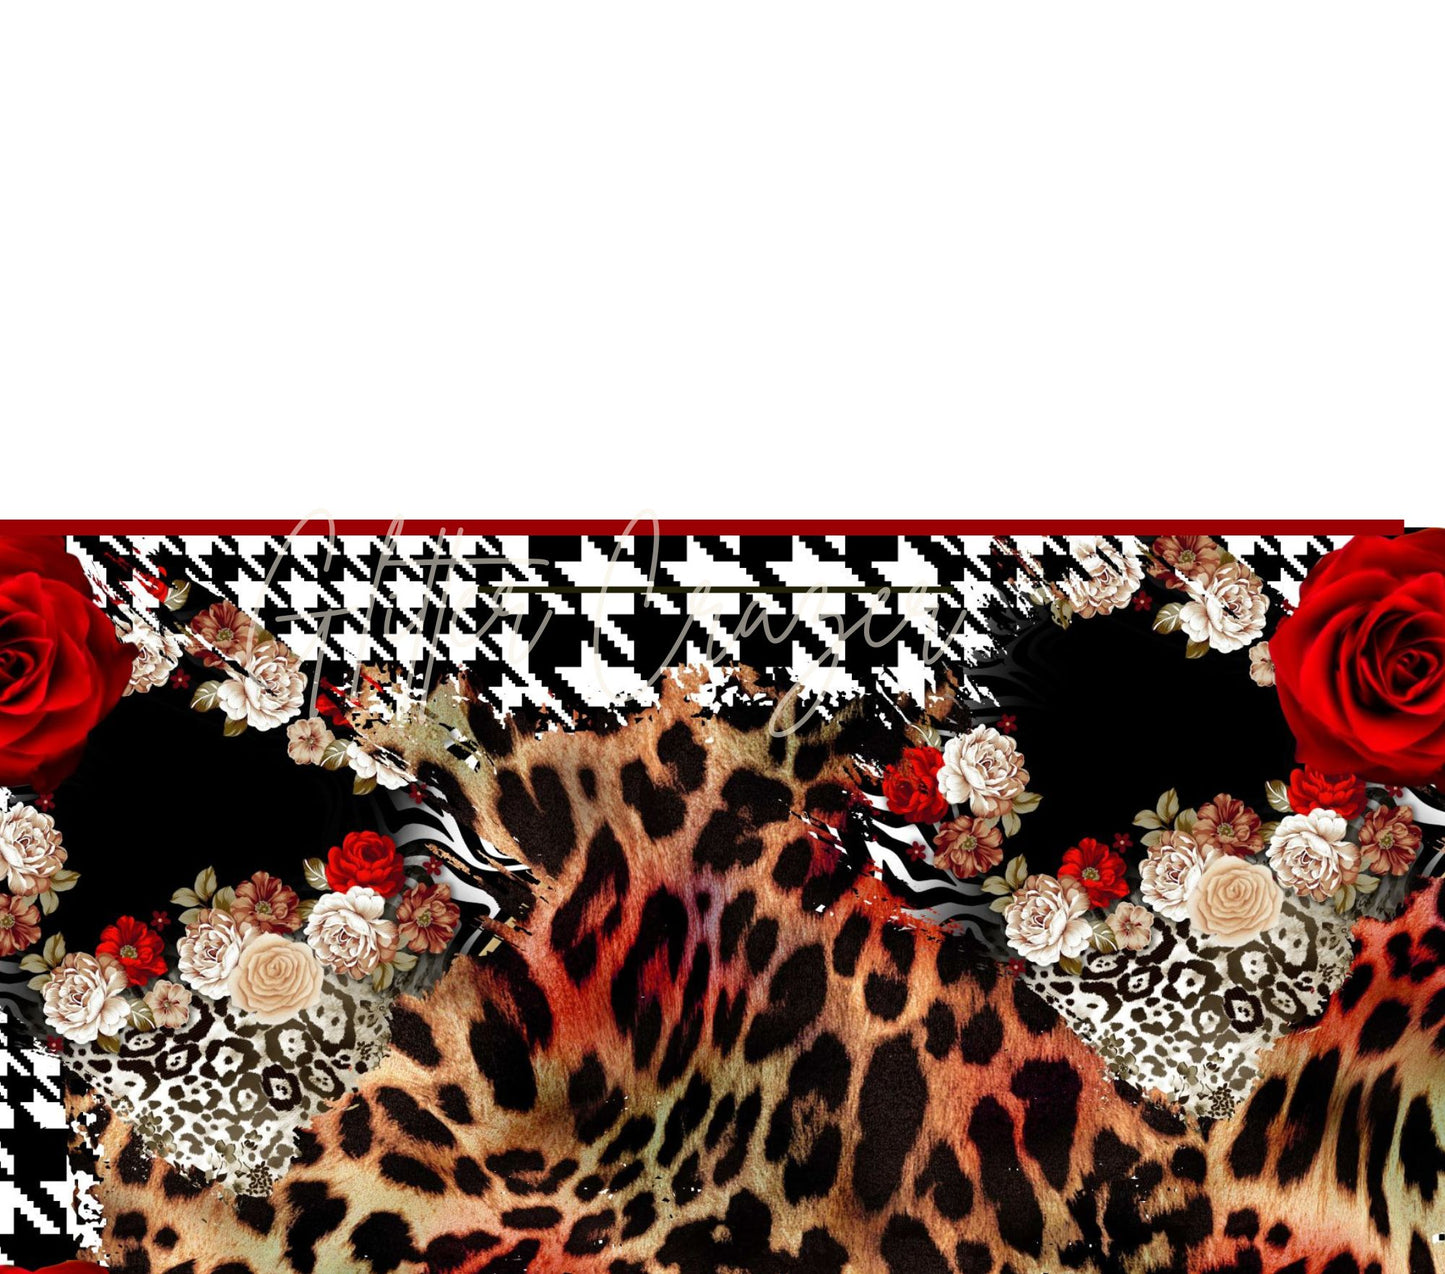 Red Roses and Houndstooth wraps and decal- 6 Designs